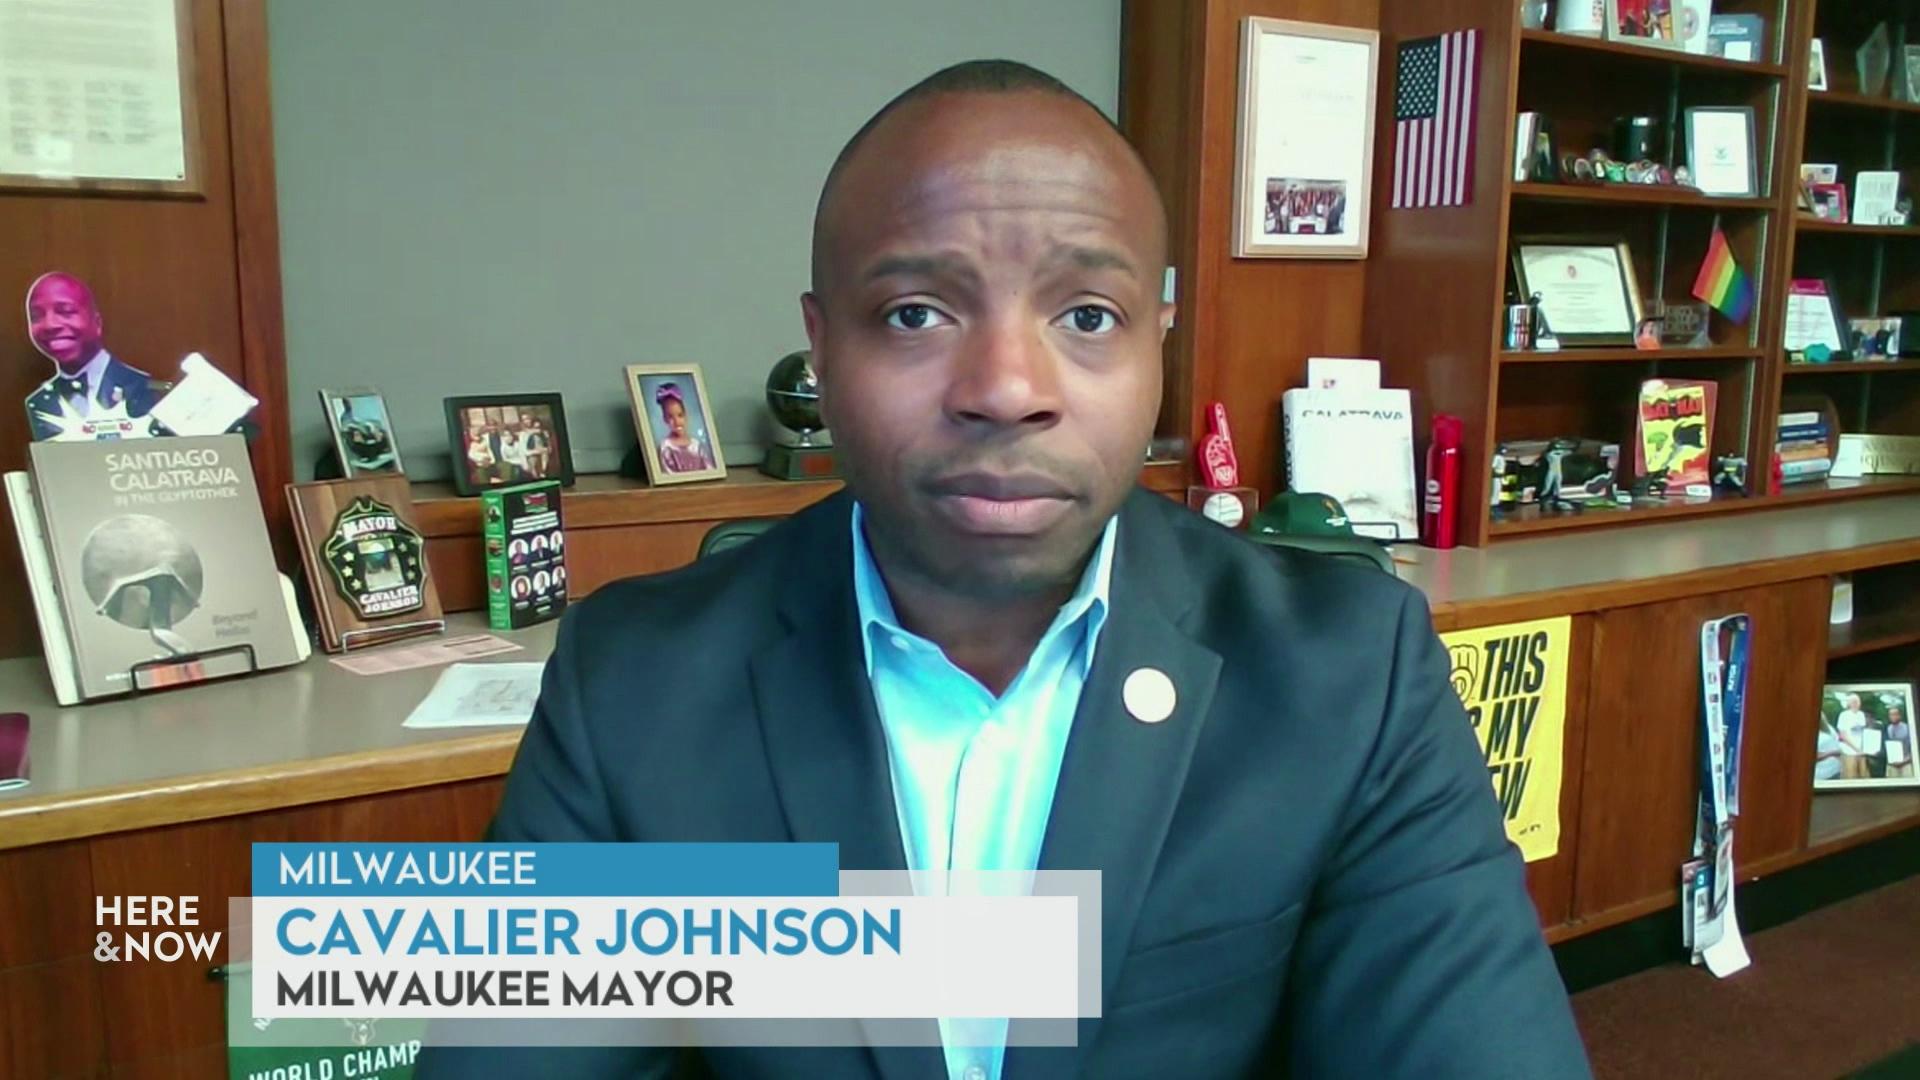 A still image from a video shows Mayor Cavalier Johnson seated in front of wood paneled cabinets and shelves with a graphic at bottom reading 'Milwaukee,' 'Cavalier Johnson' and 'Milwaukee Mayor.'